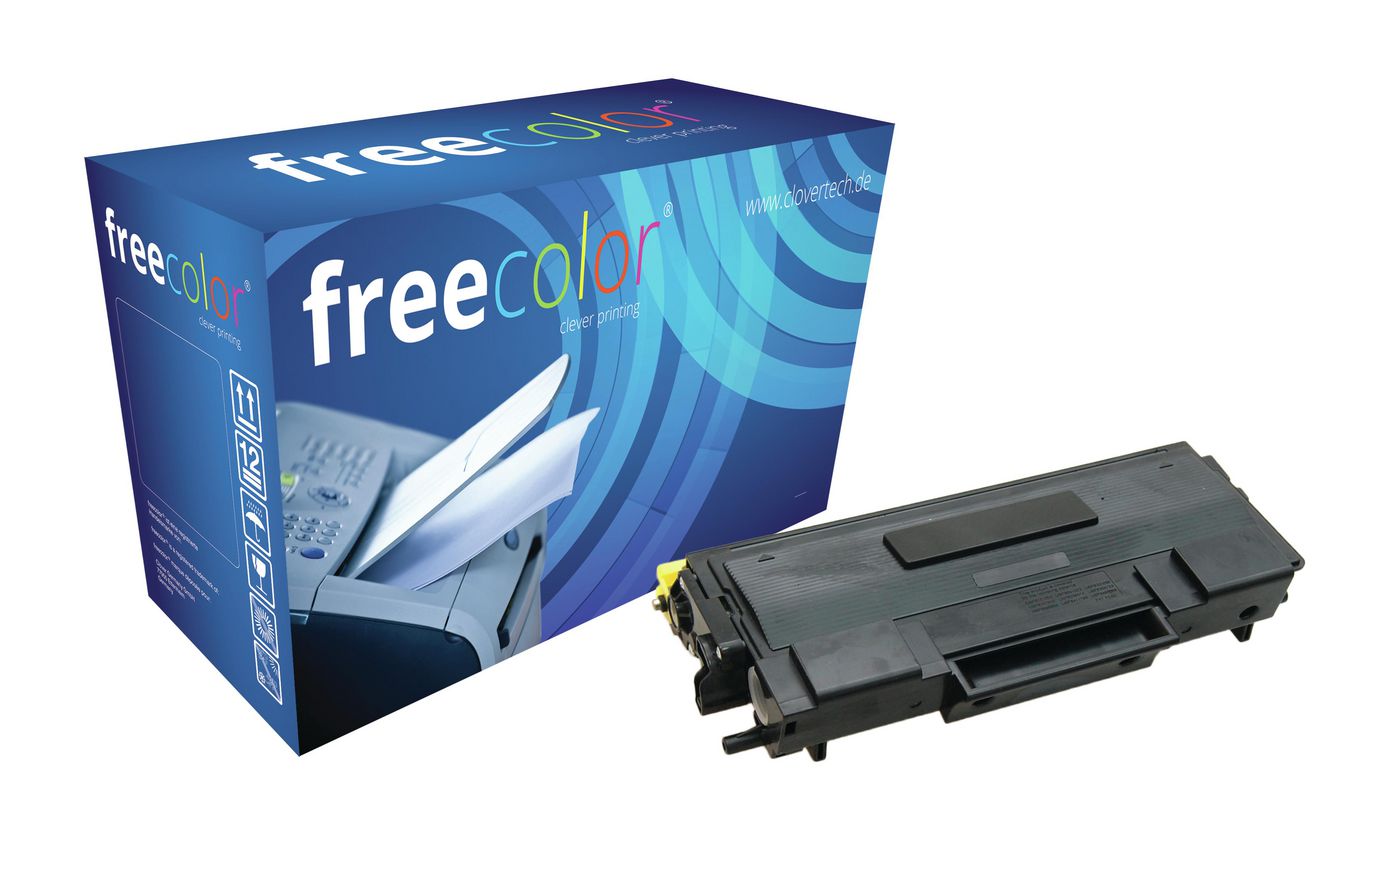 Freecolor 800319 Toner Black TN 4100 Pages 